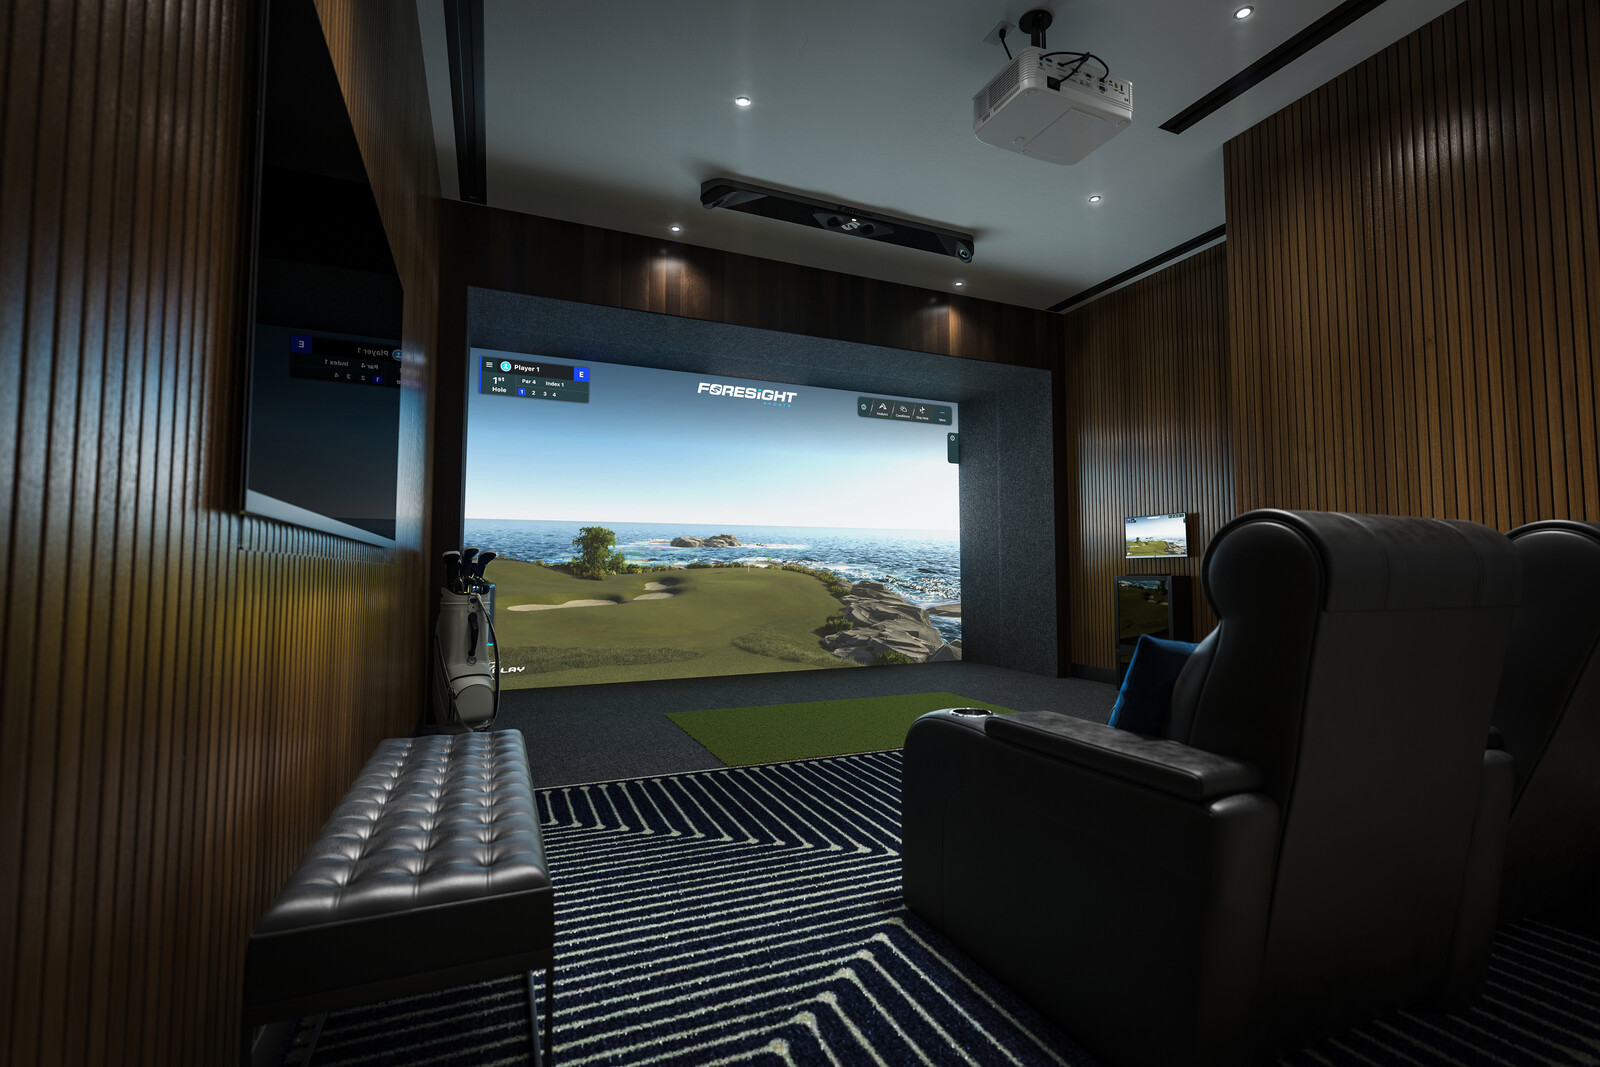 Foresight Sports - Home Theatre or Golf Simulator?